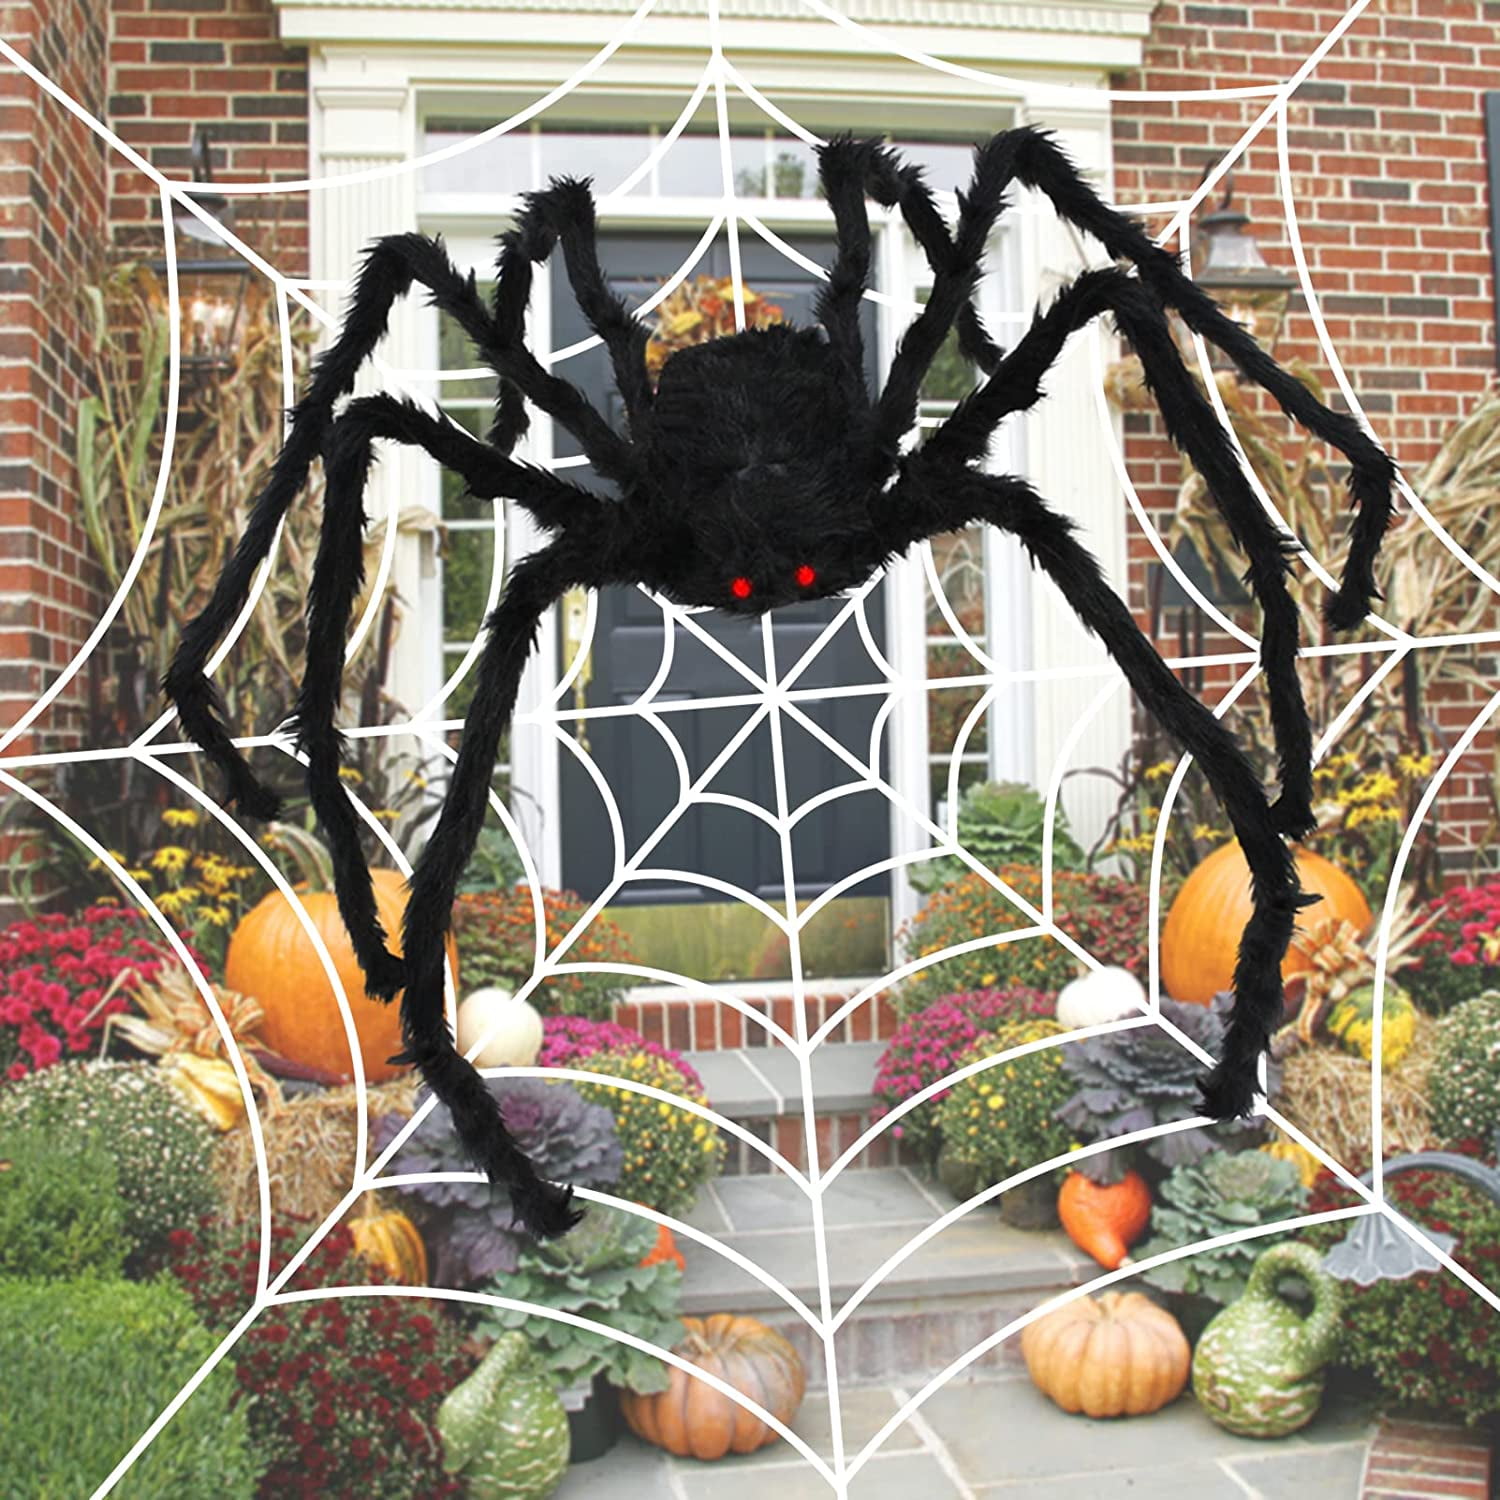 Coolmade Halloween Spider Web Decorations, 10ft Large Spider Web with ...